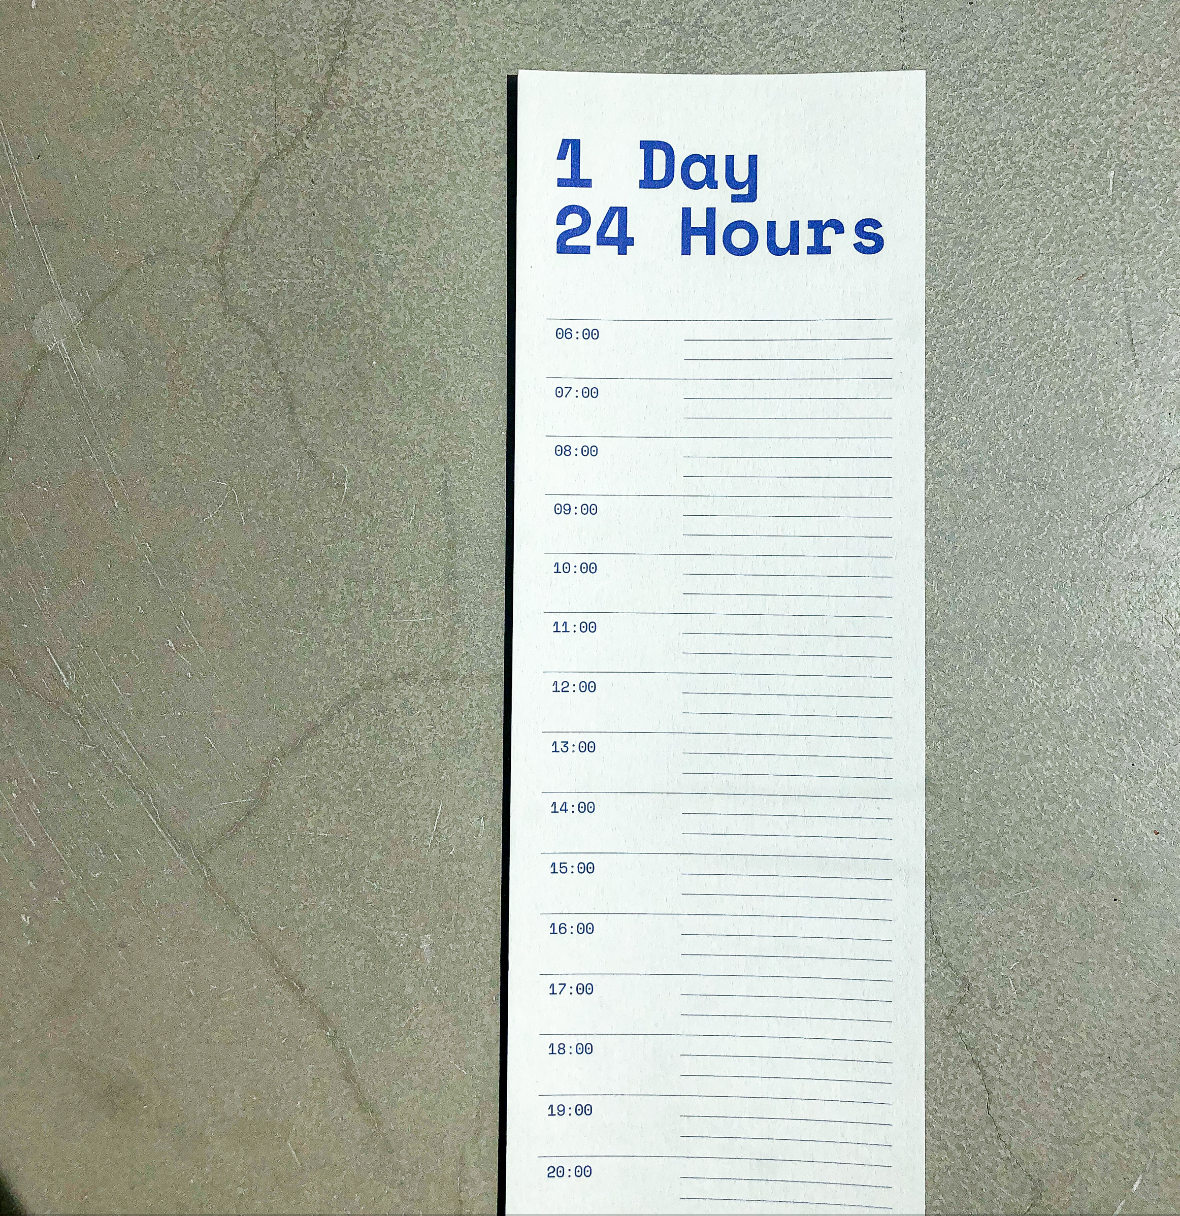 1 Day 24 Hours by OFFCUT